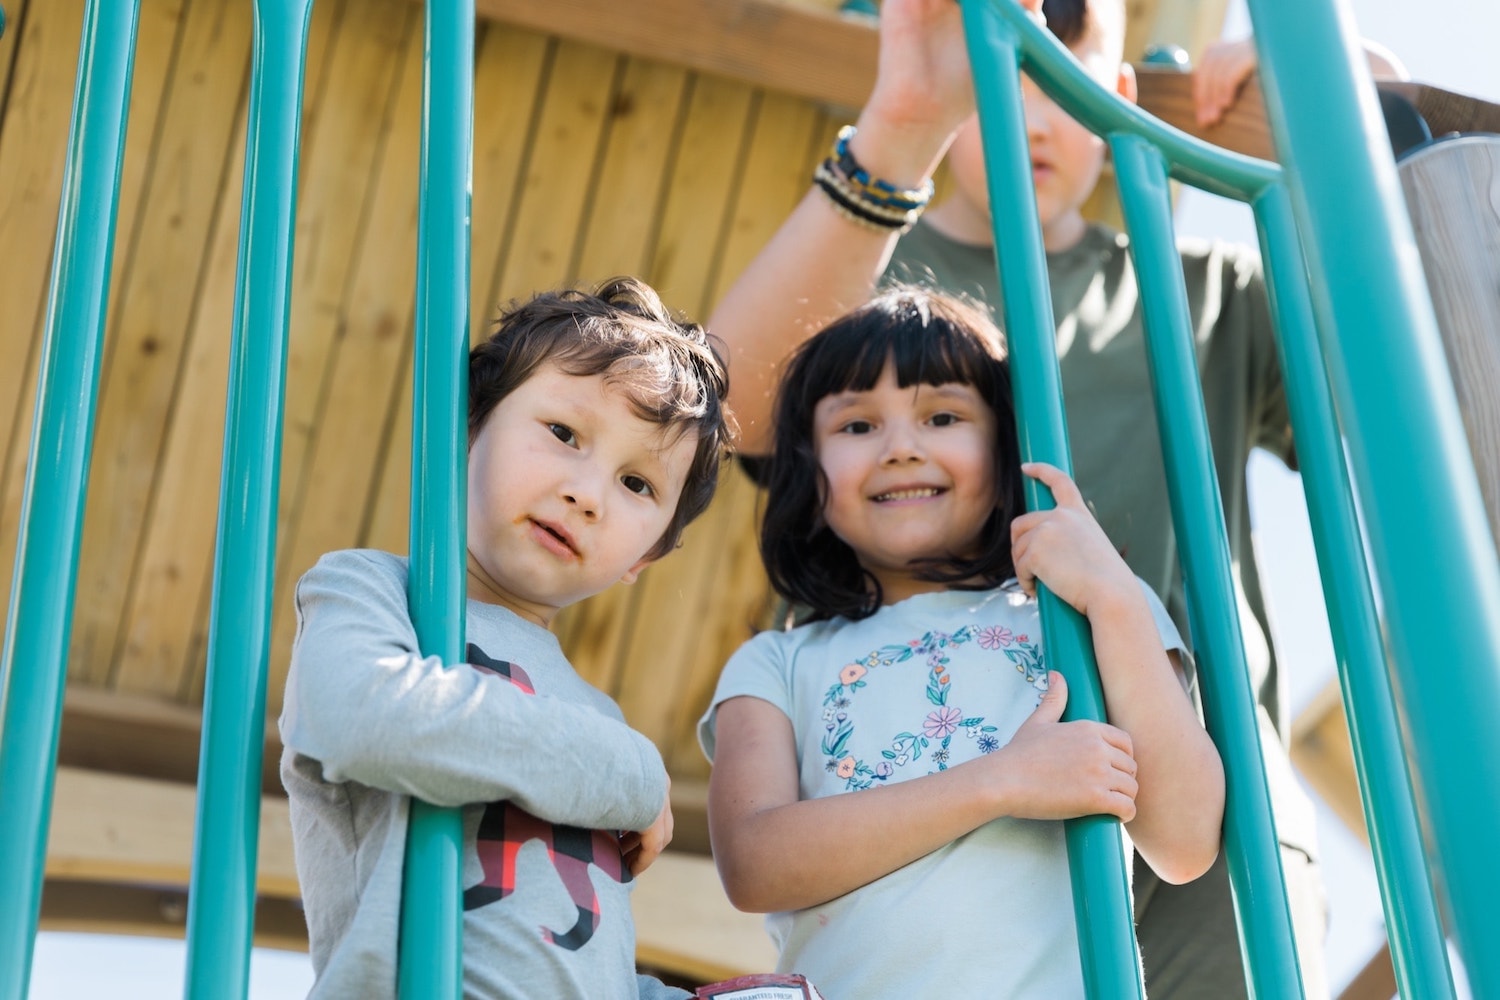 Two children playing on a playground, with a focus on a young boy and girl standing behind blue metal bars on a play structure, both looking towards the camera.